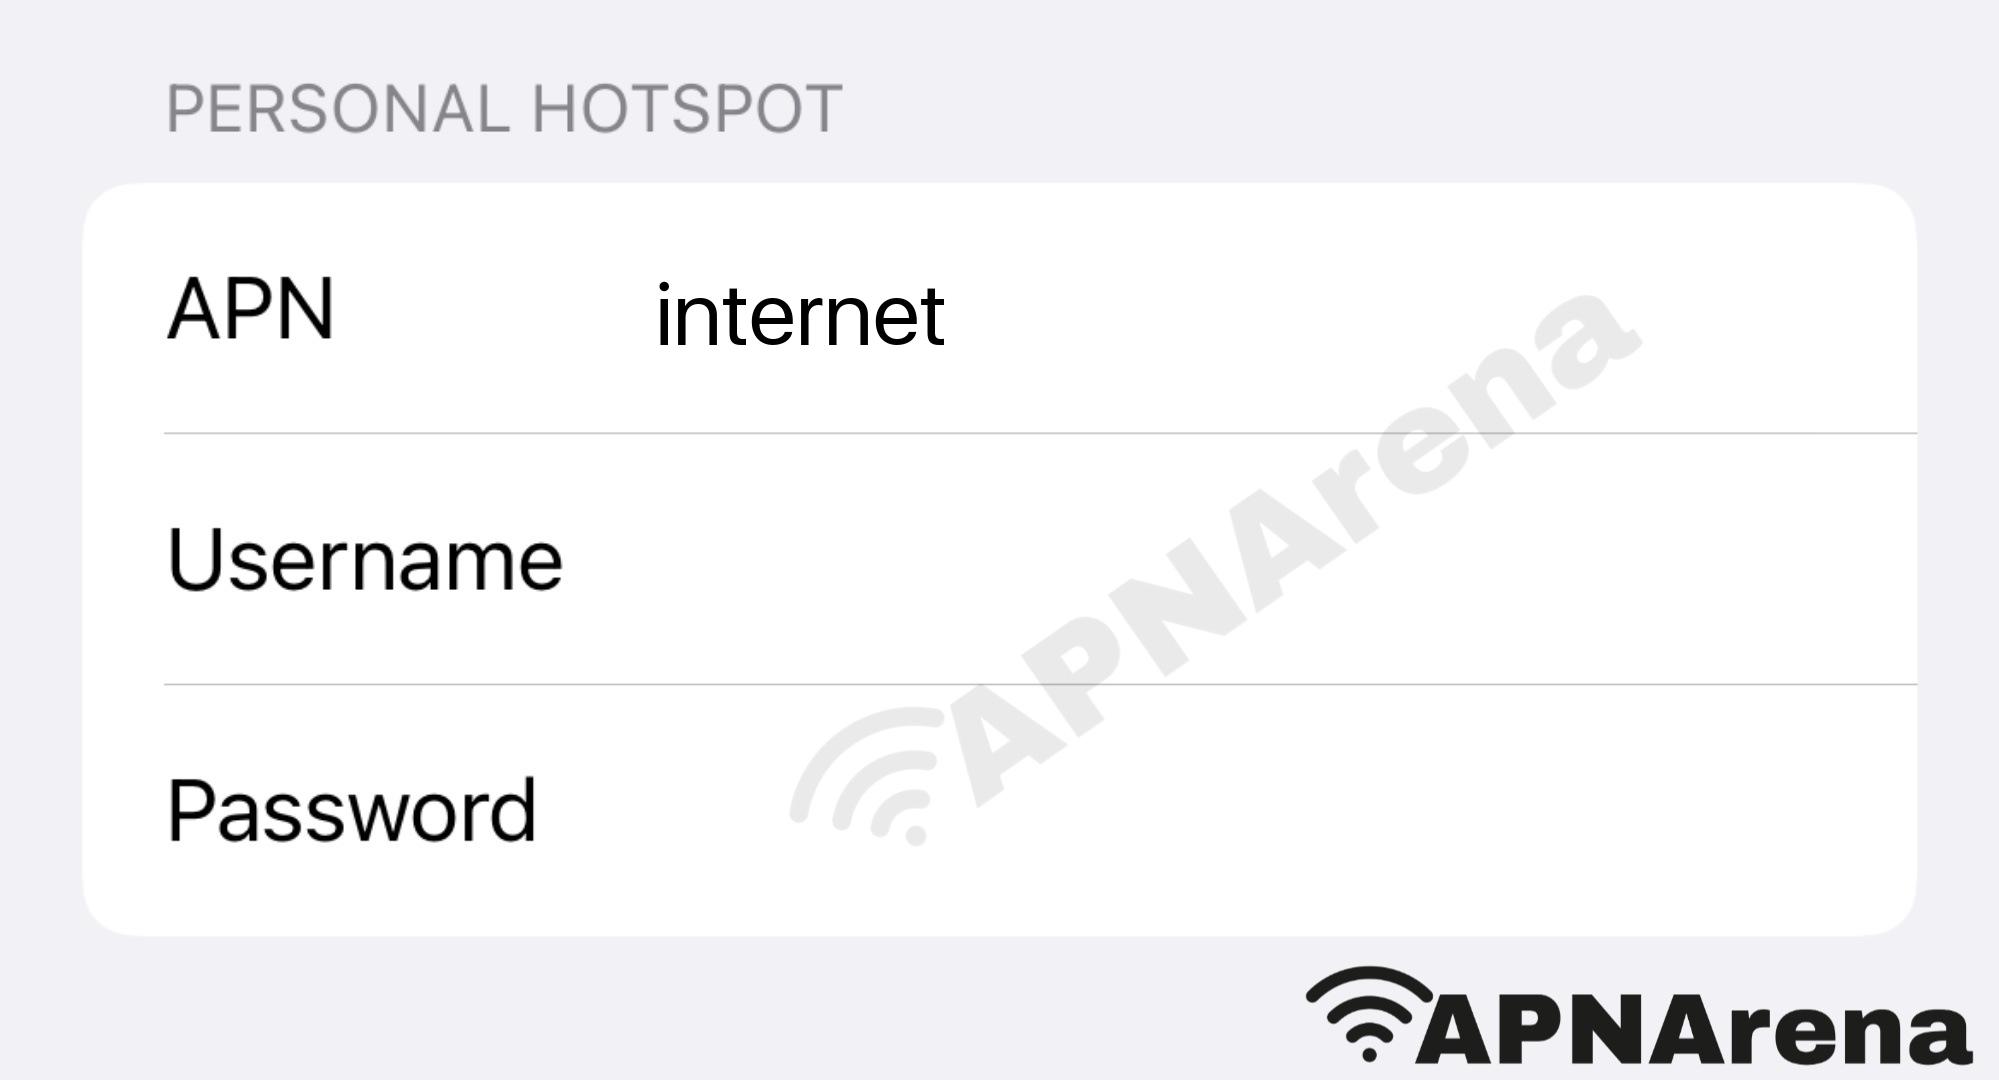 enTouch Wireless Personal Hotspot Settings for iPhone